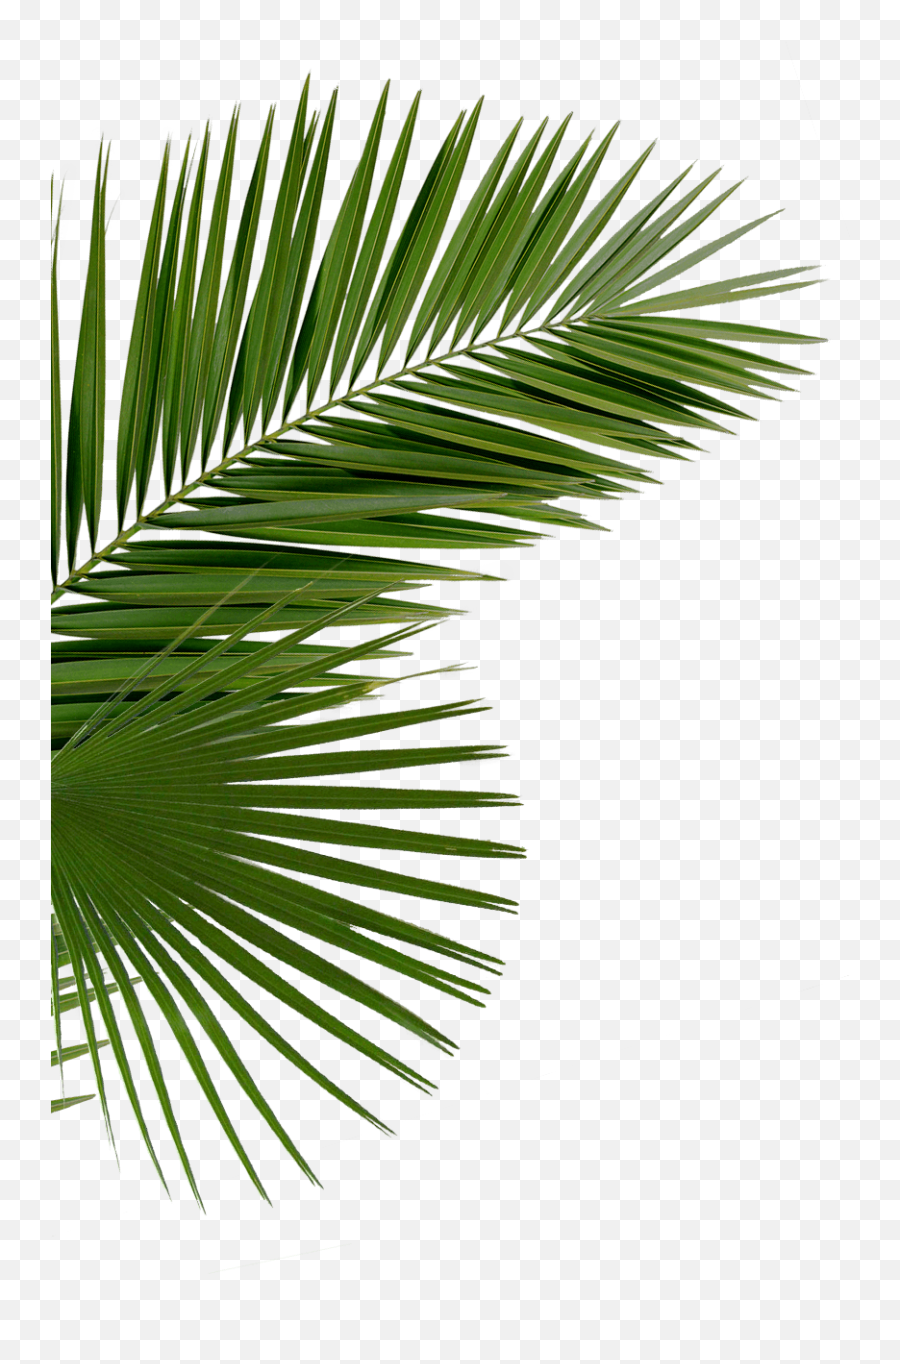 Download Free Png Palms Images - Palm Leaf Png,Palms Png